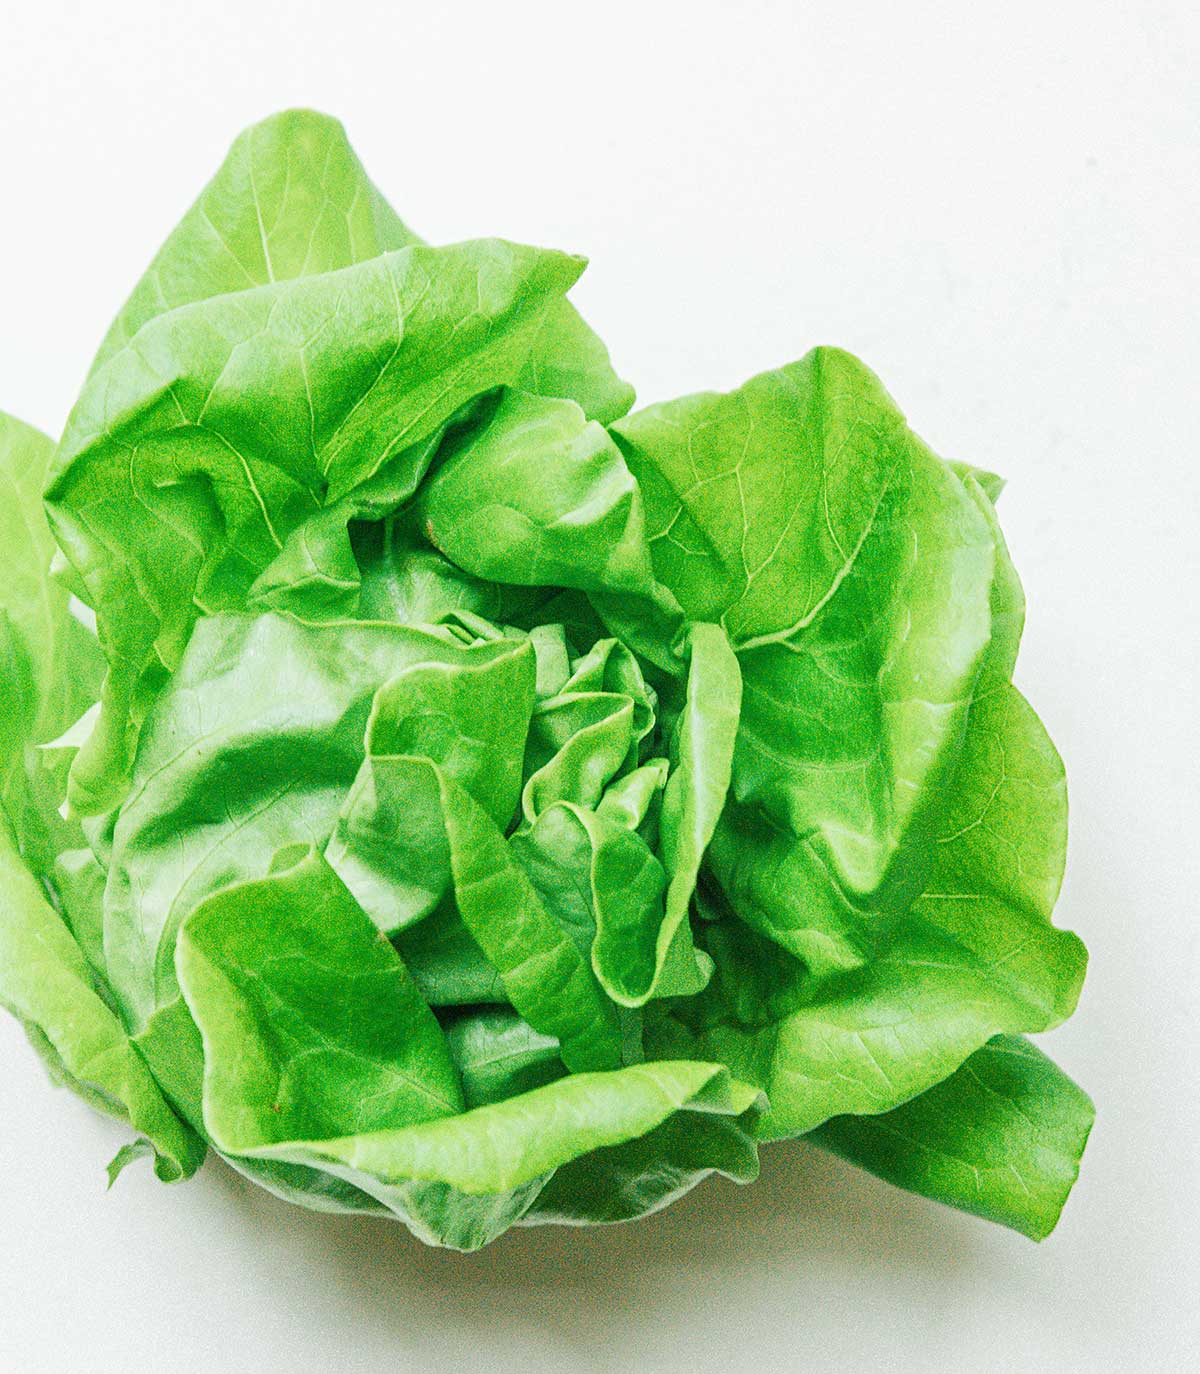 A close-up image detailing the texture and color of a head of green butterhead lettuce